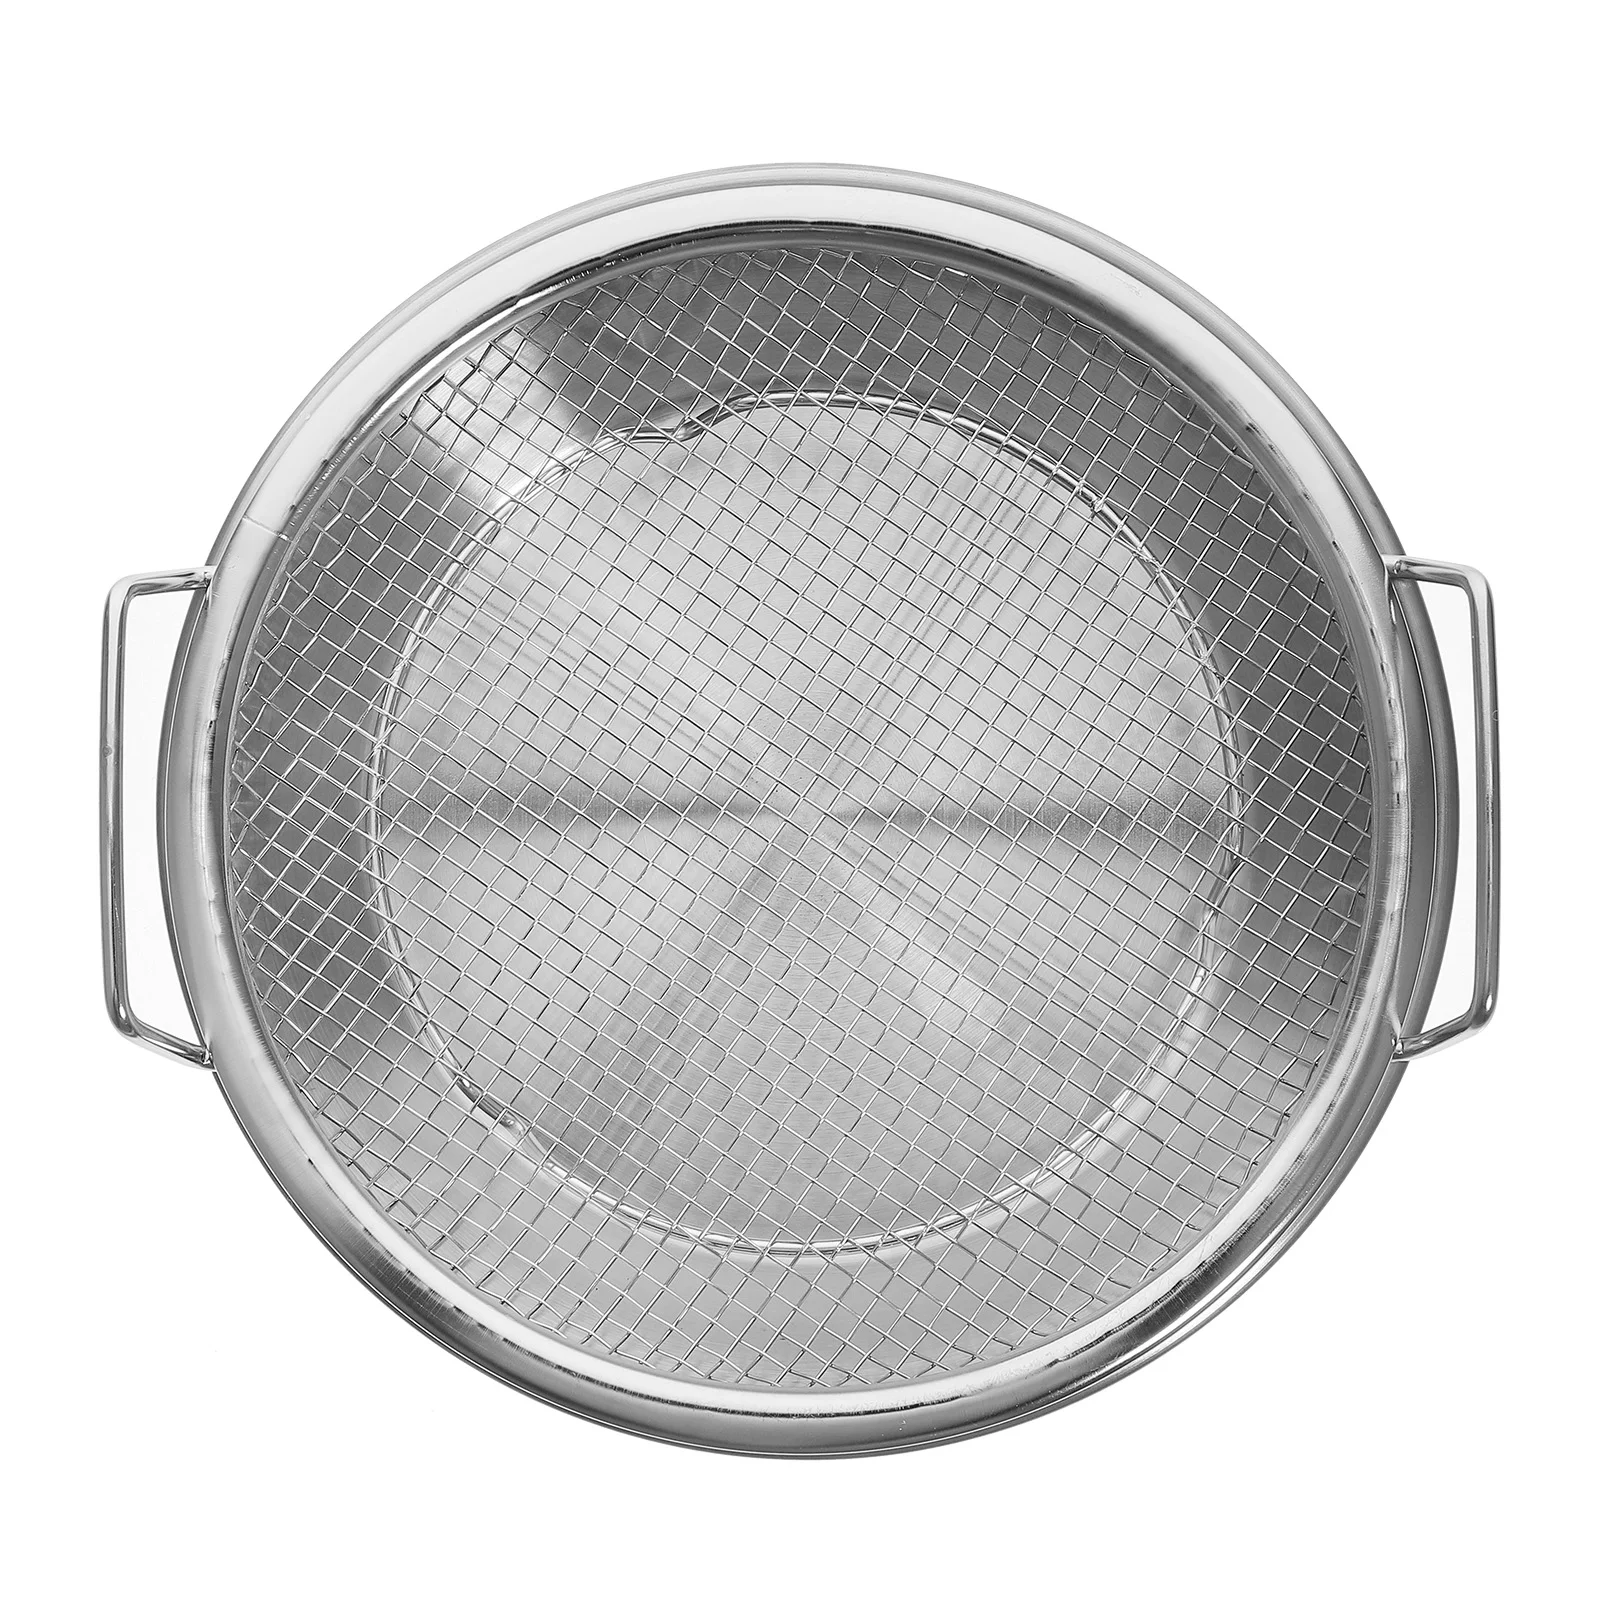 

Mesh Drain Pan Snack Dish Vegetable Tray Fried Foods Plate Stainless Steel Griddle Convenient Fruits Bakeware Holder Container